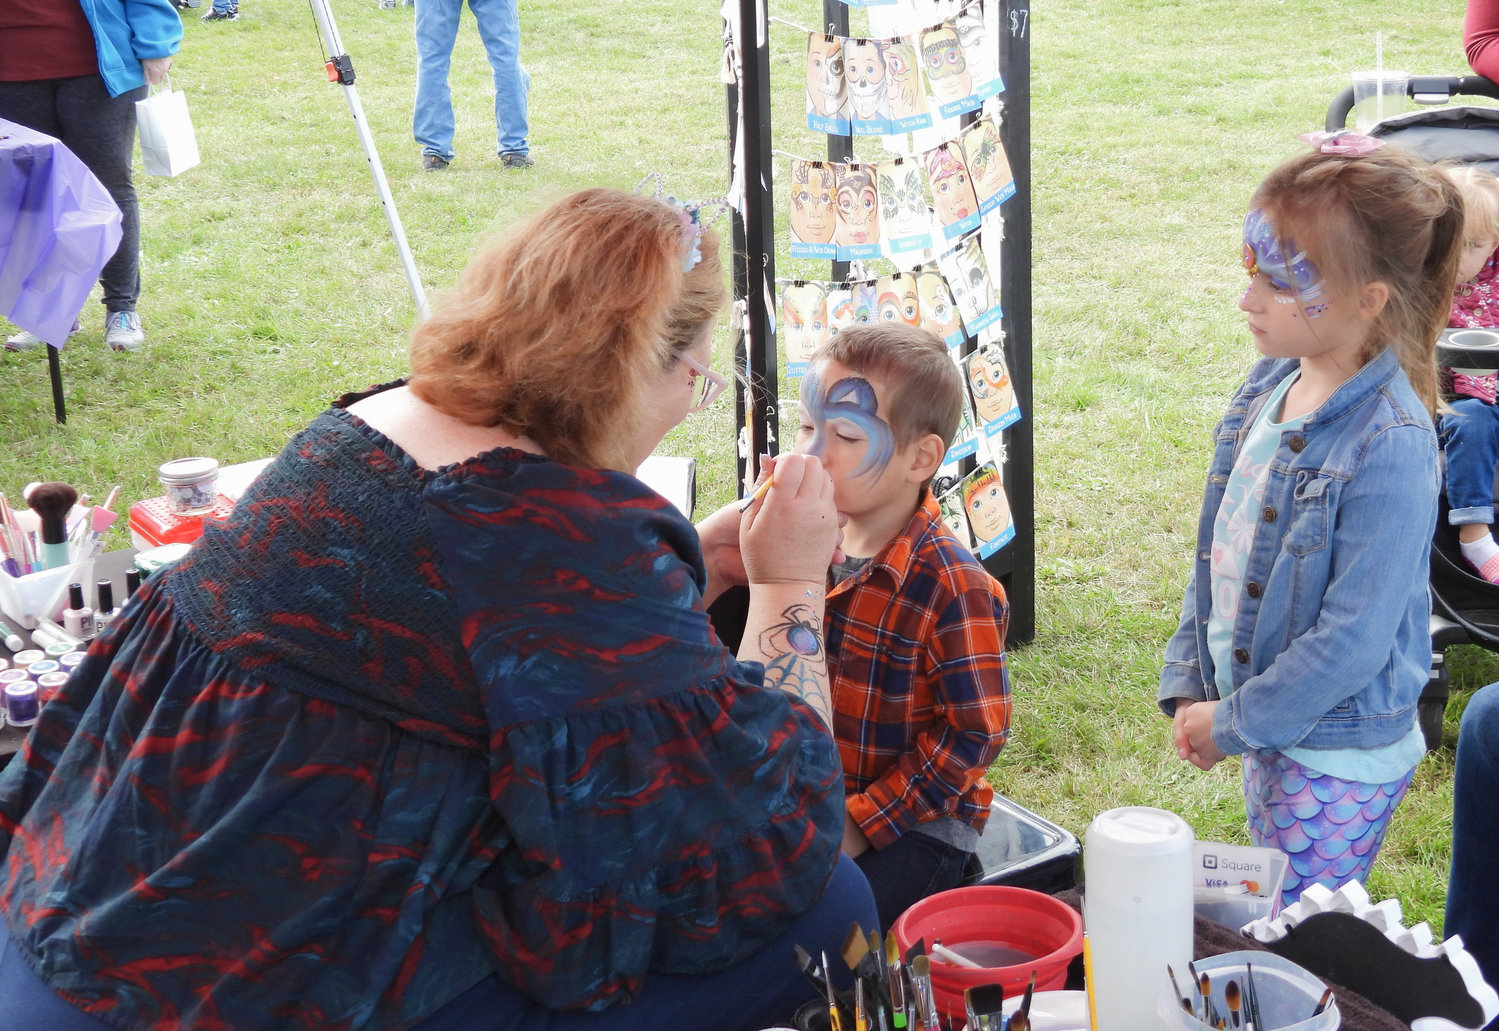 Children get their face painted at the second annual Oneida Fall Fest on Saturday, Oct. 1.